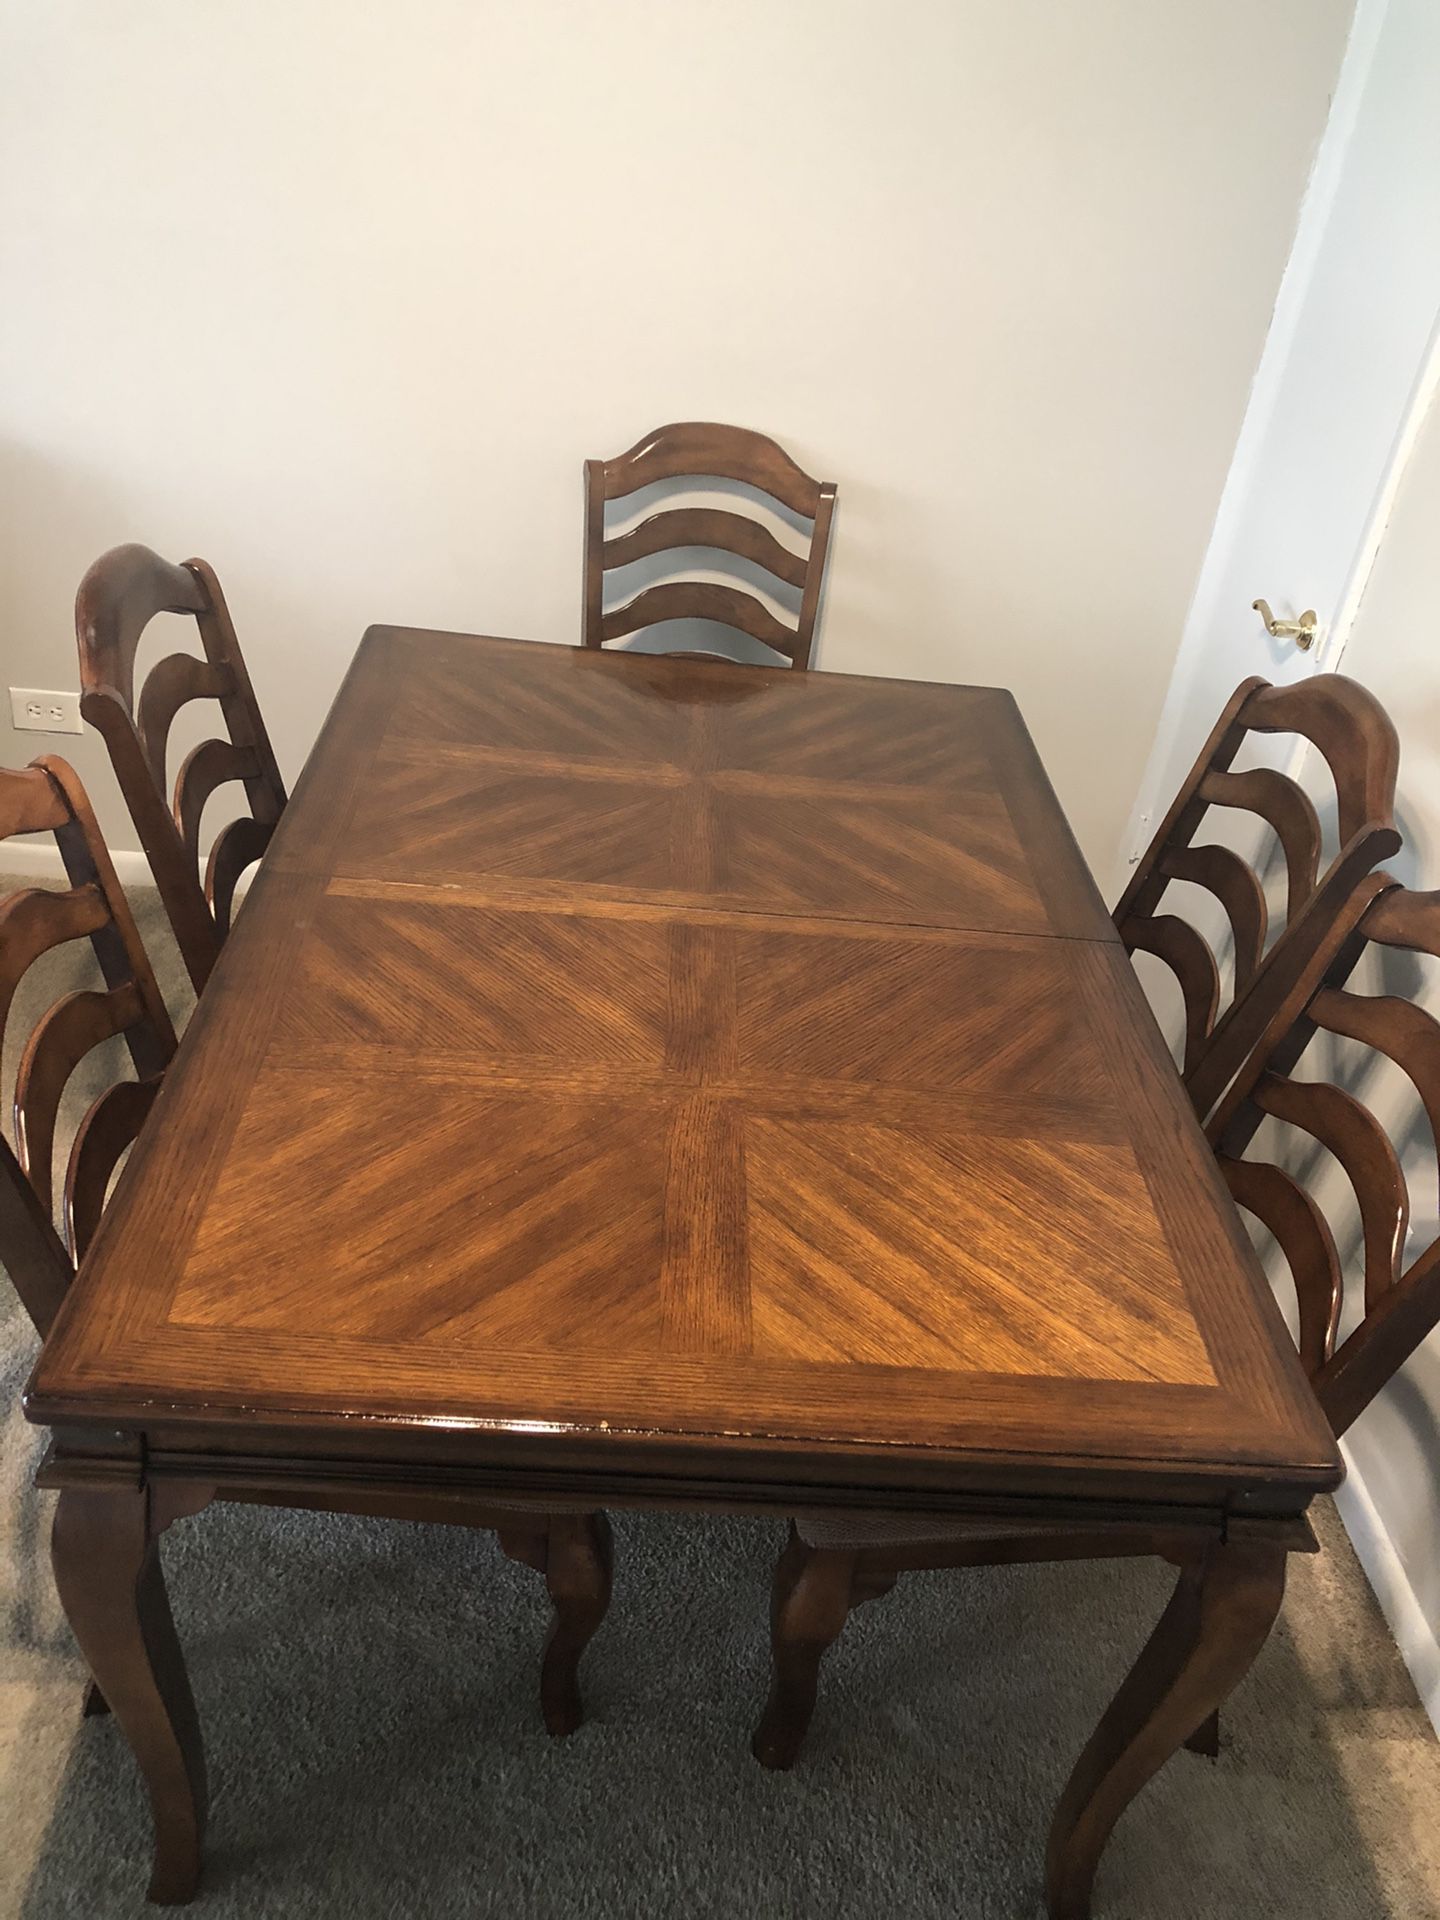 Dinning table set 78”x40” 6 chairs plus with coffee table!!.